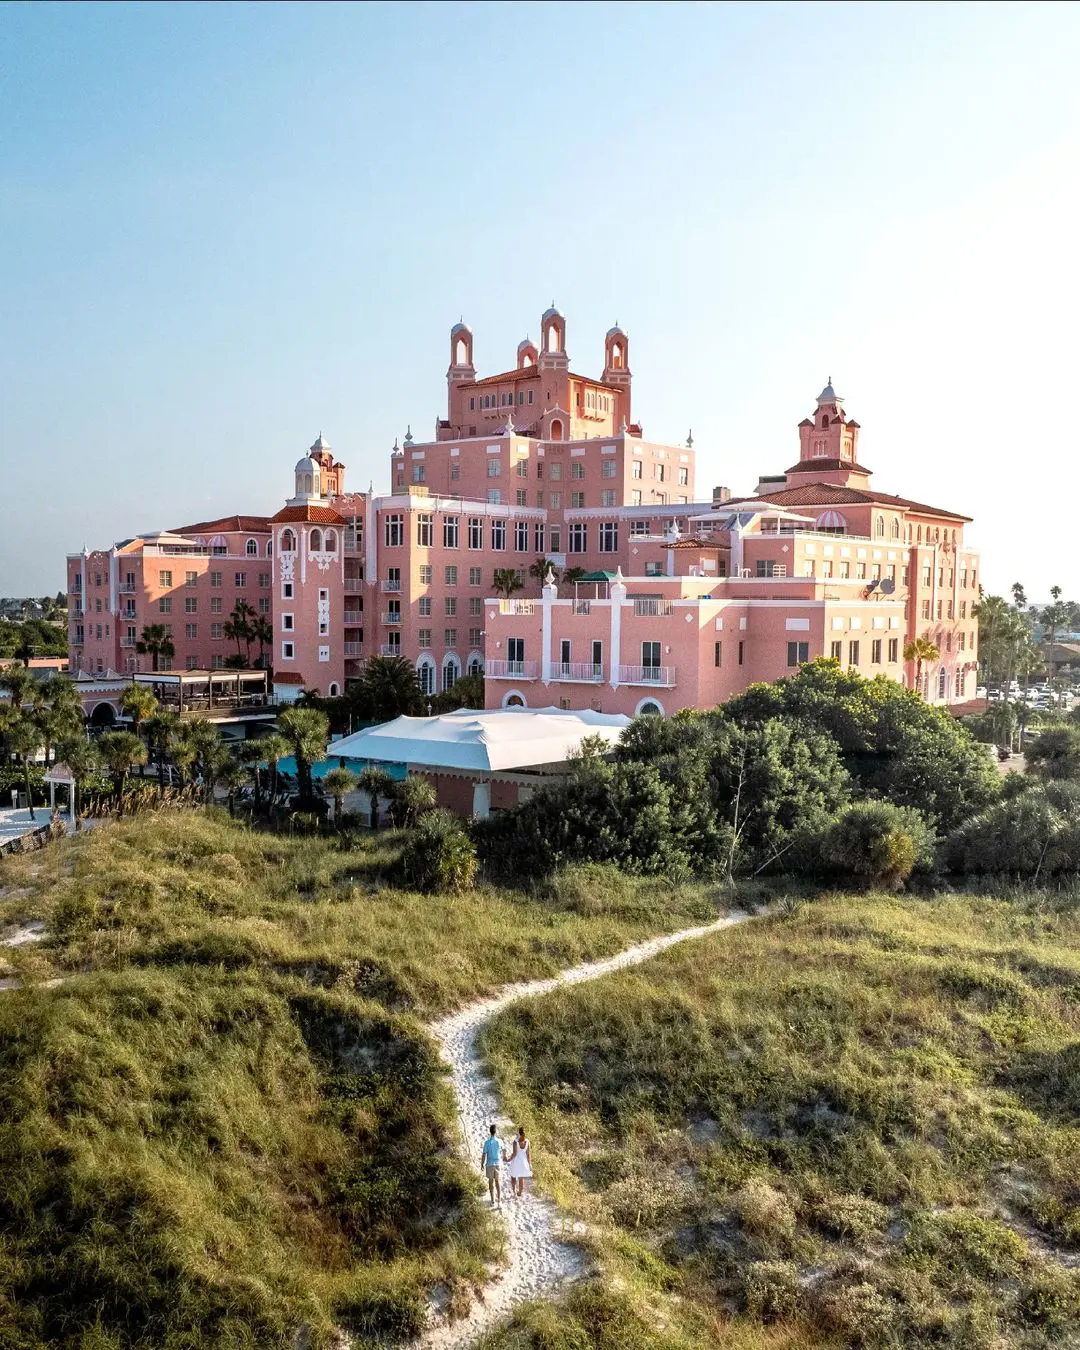 The Don CeSar is a lavish hotel for the rich